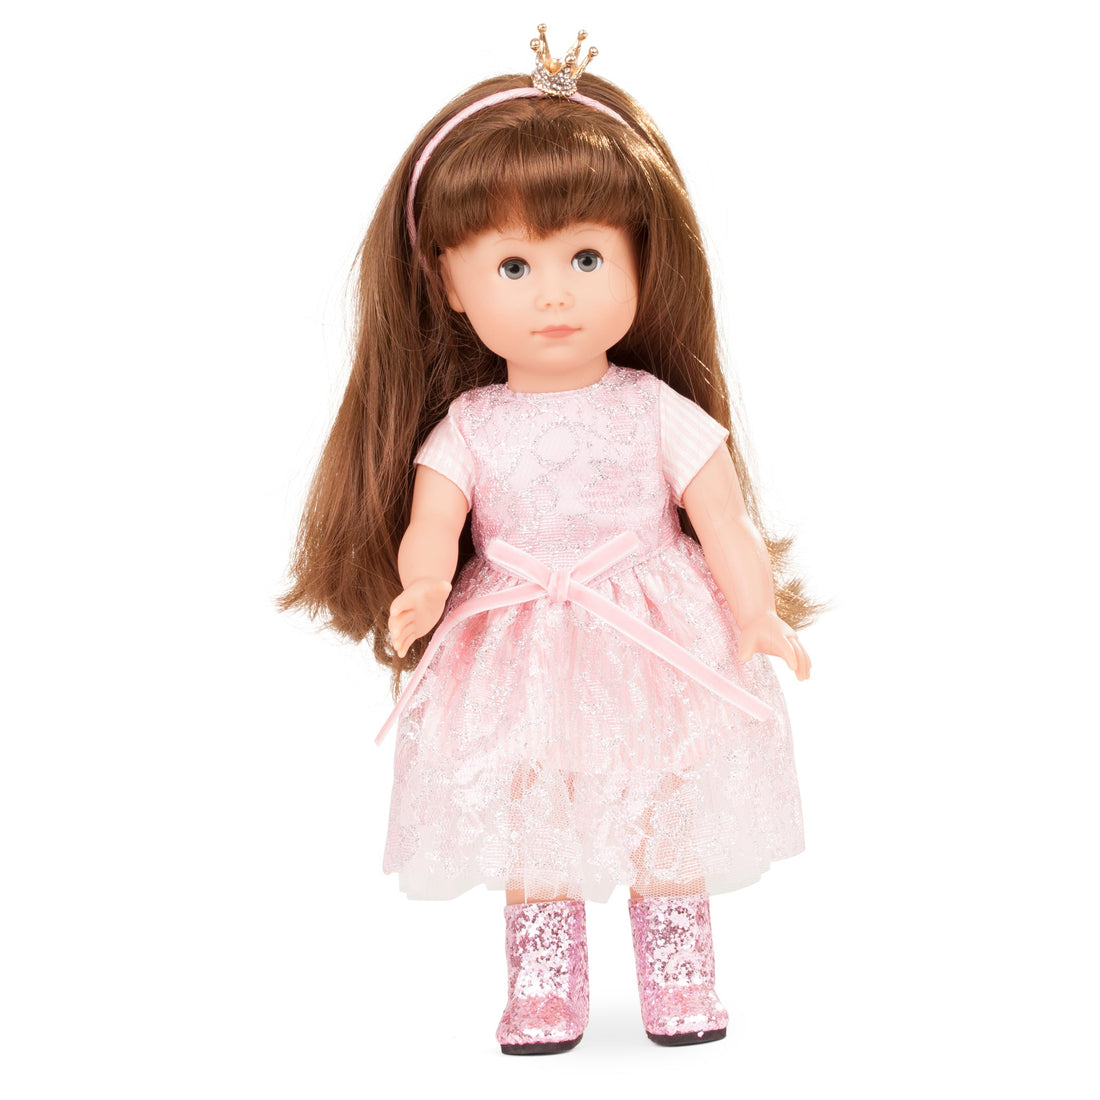 Princess Chloe - Dolls and Accessories